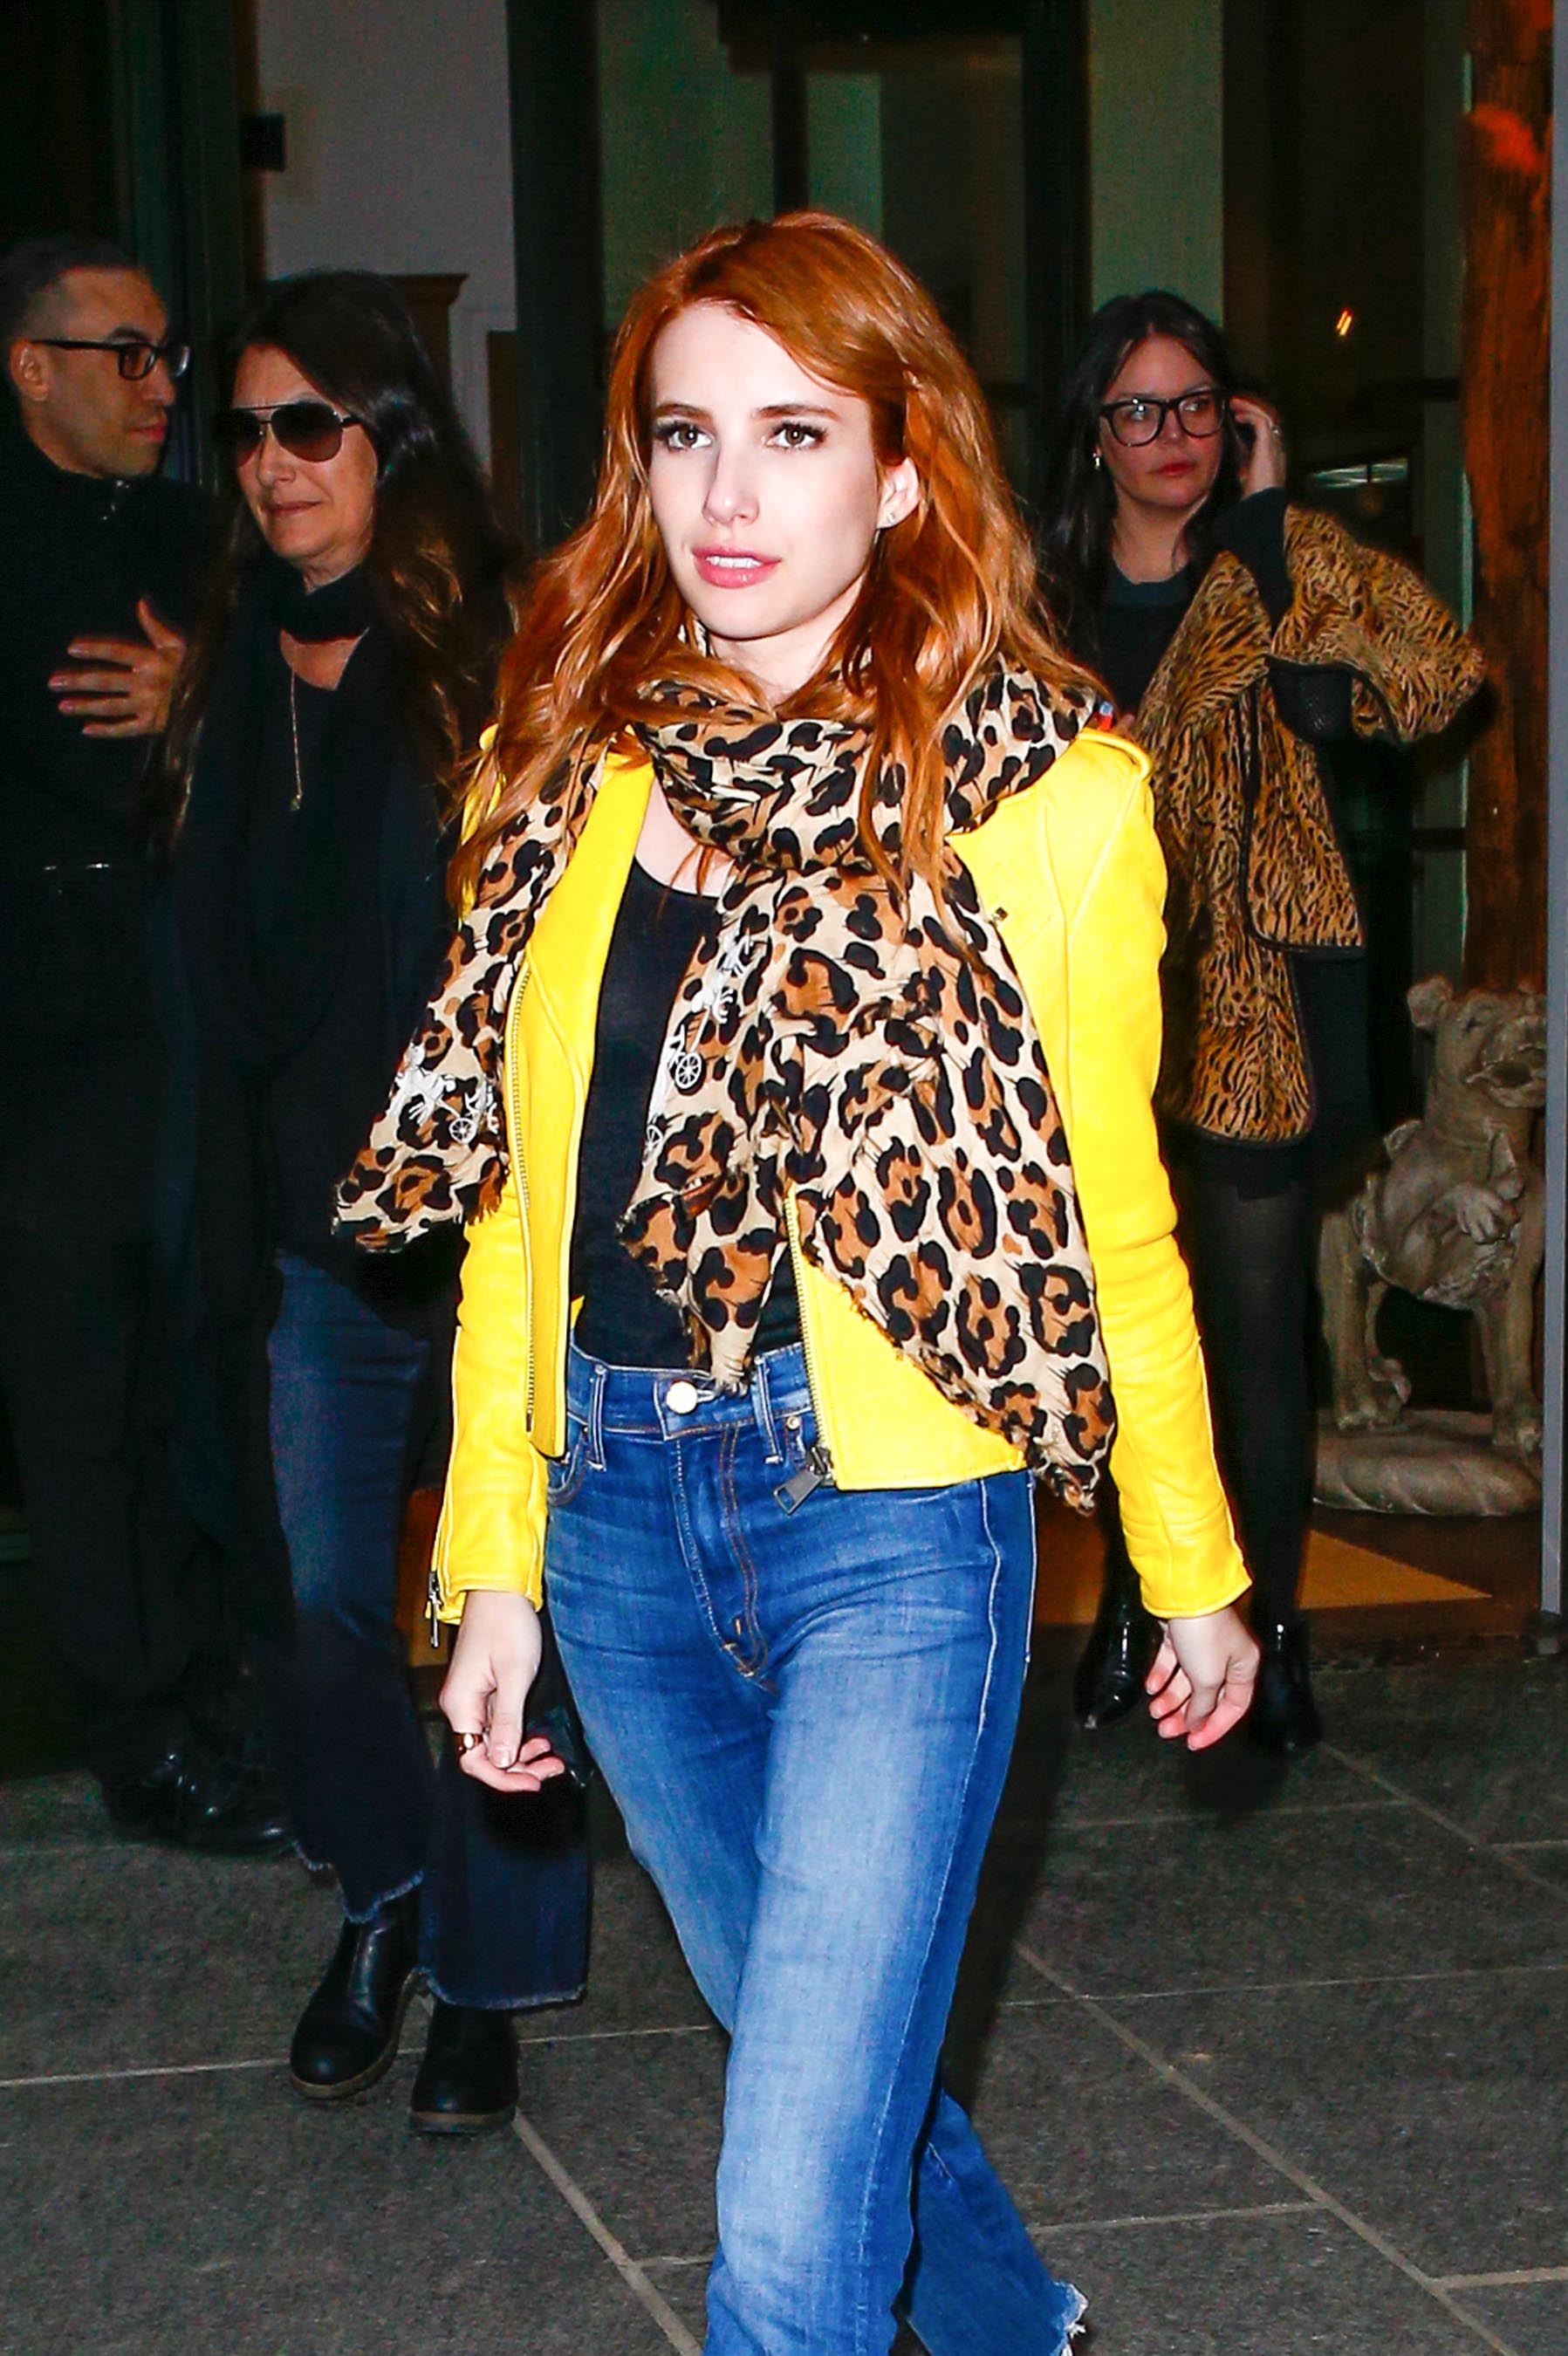 Emma Roberts leaving her hotel in the NYC